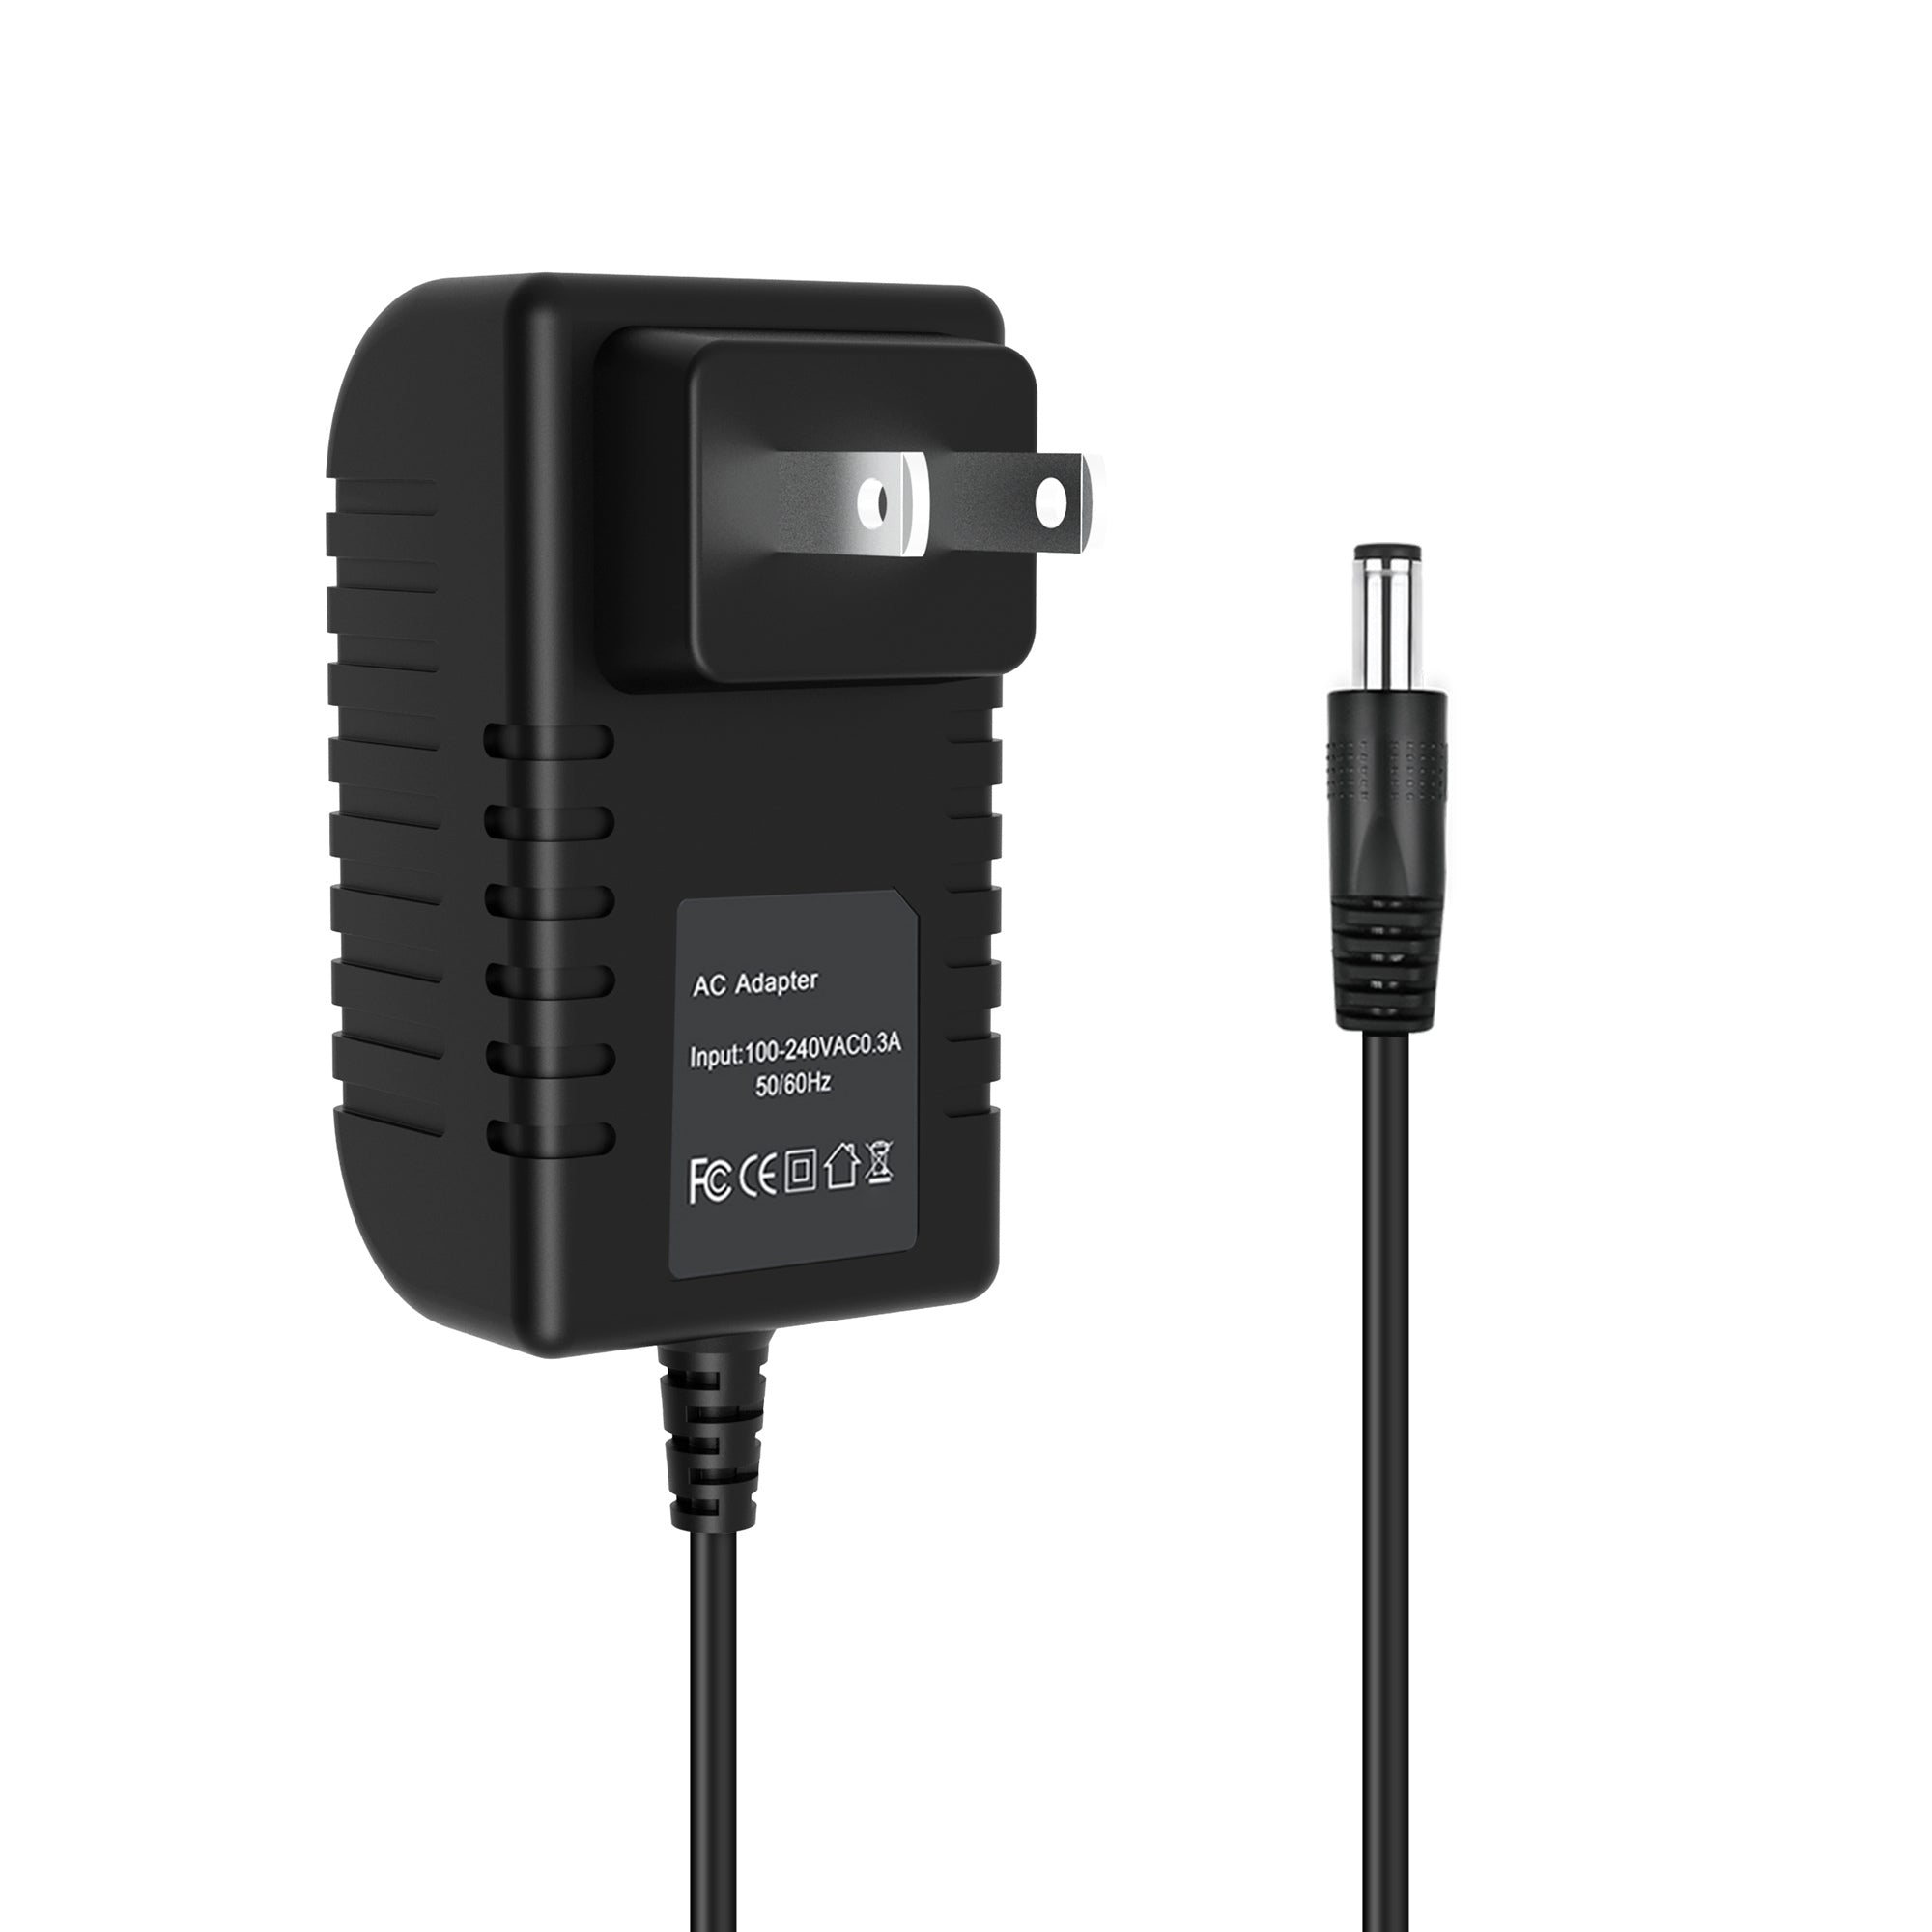 AbleGrid AC/DC Adapter Compatible with HANNSpree HANNSpad SN1AT71BXE 16GB Wi-Fi 10.1 Android Tablet PC Power Supply Cord Cable PS Wall Home Charger